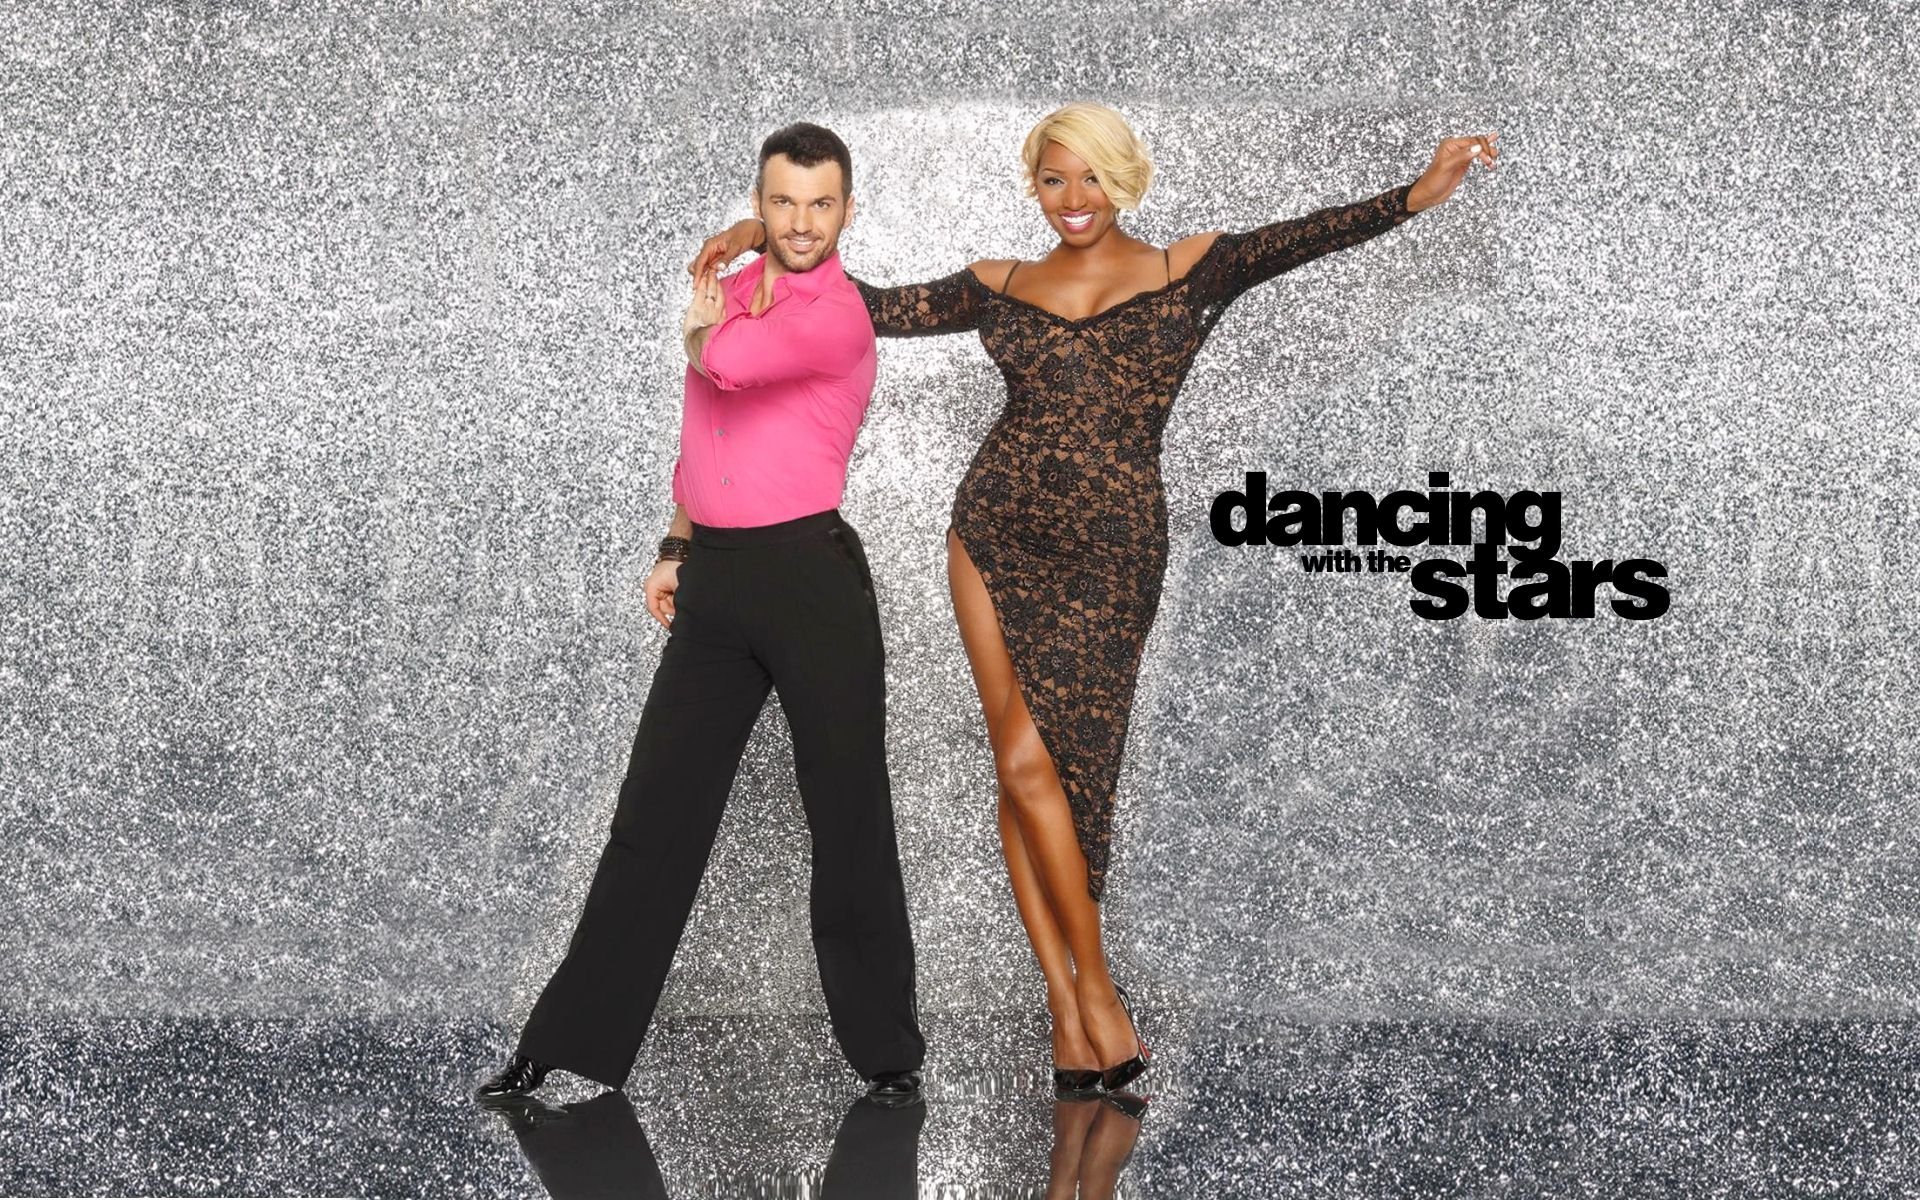 dancing with the stars, Family, Gameshow, Dance, Music, Stars, Dancing,  Series, Competition, 63 Wallpapers HD / Desktop and Mobile Backgrounds